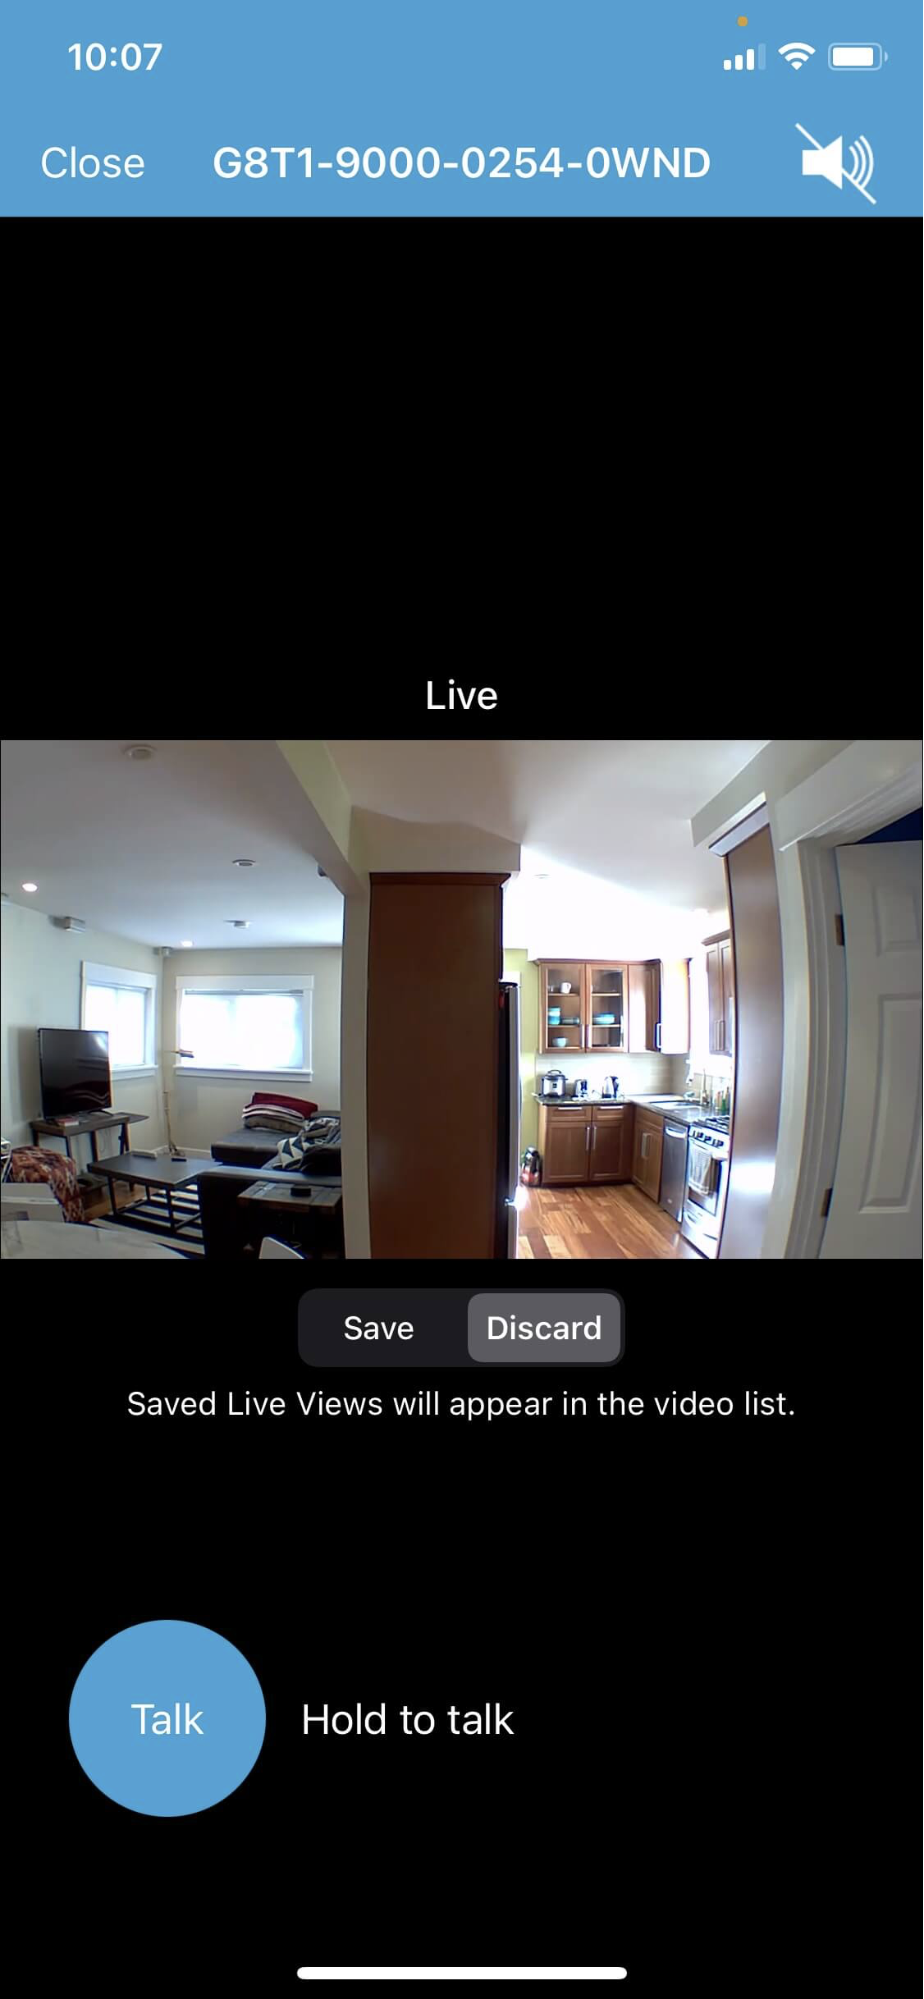 Screenshot of the Blink mobile app showing the camera's live feed